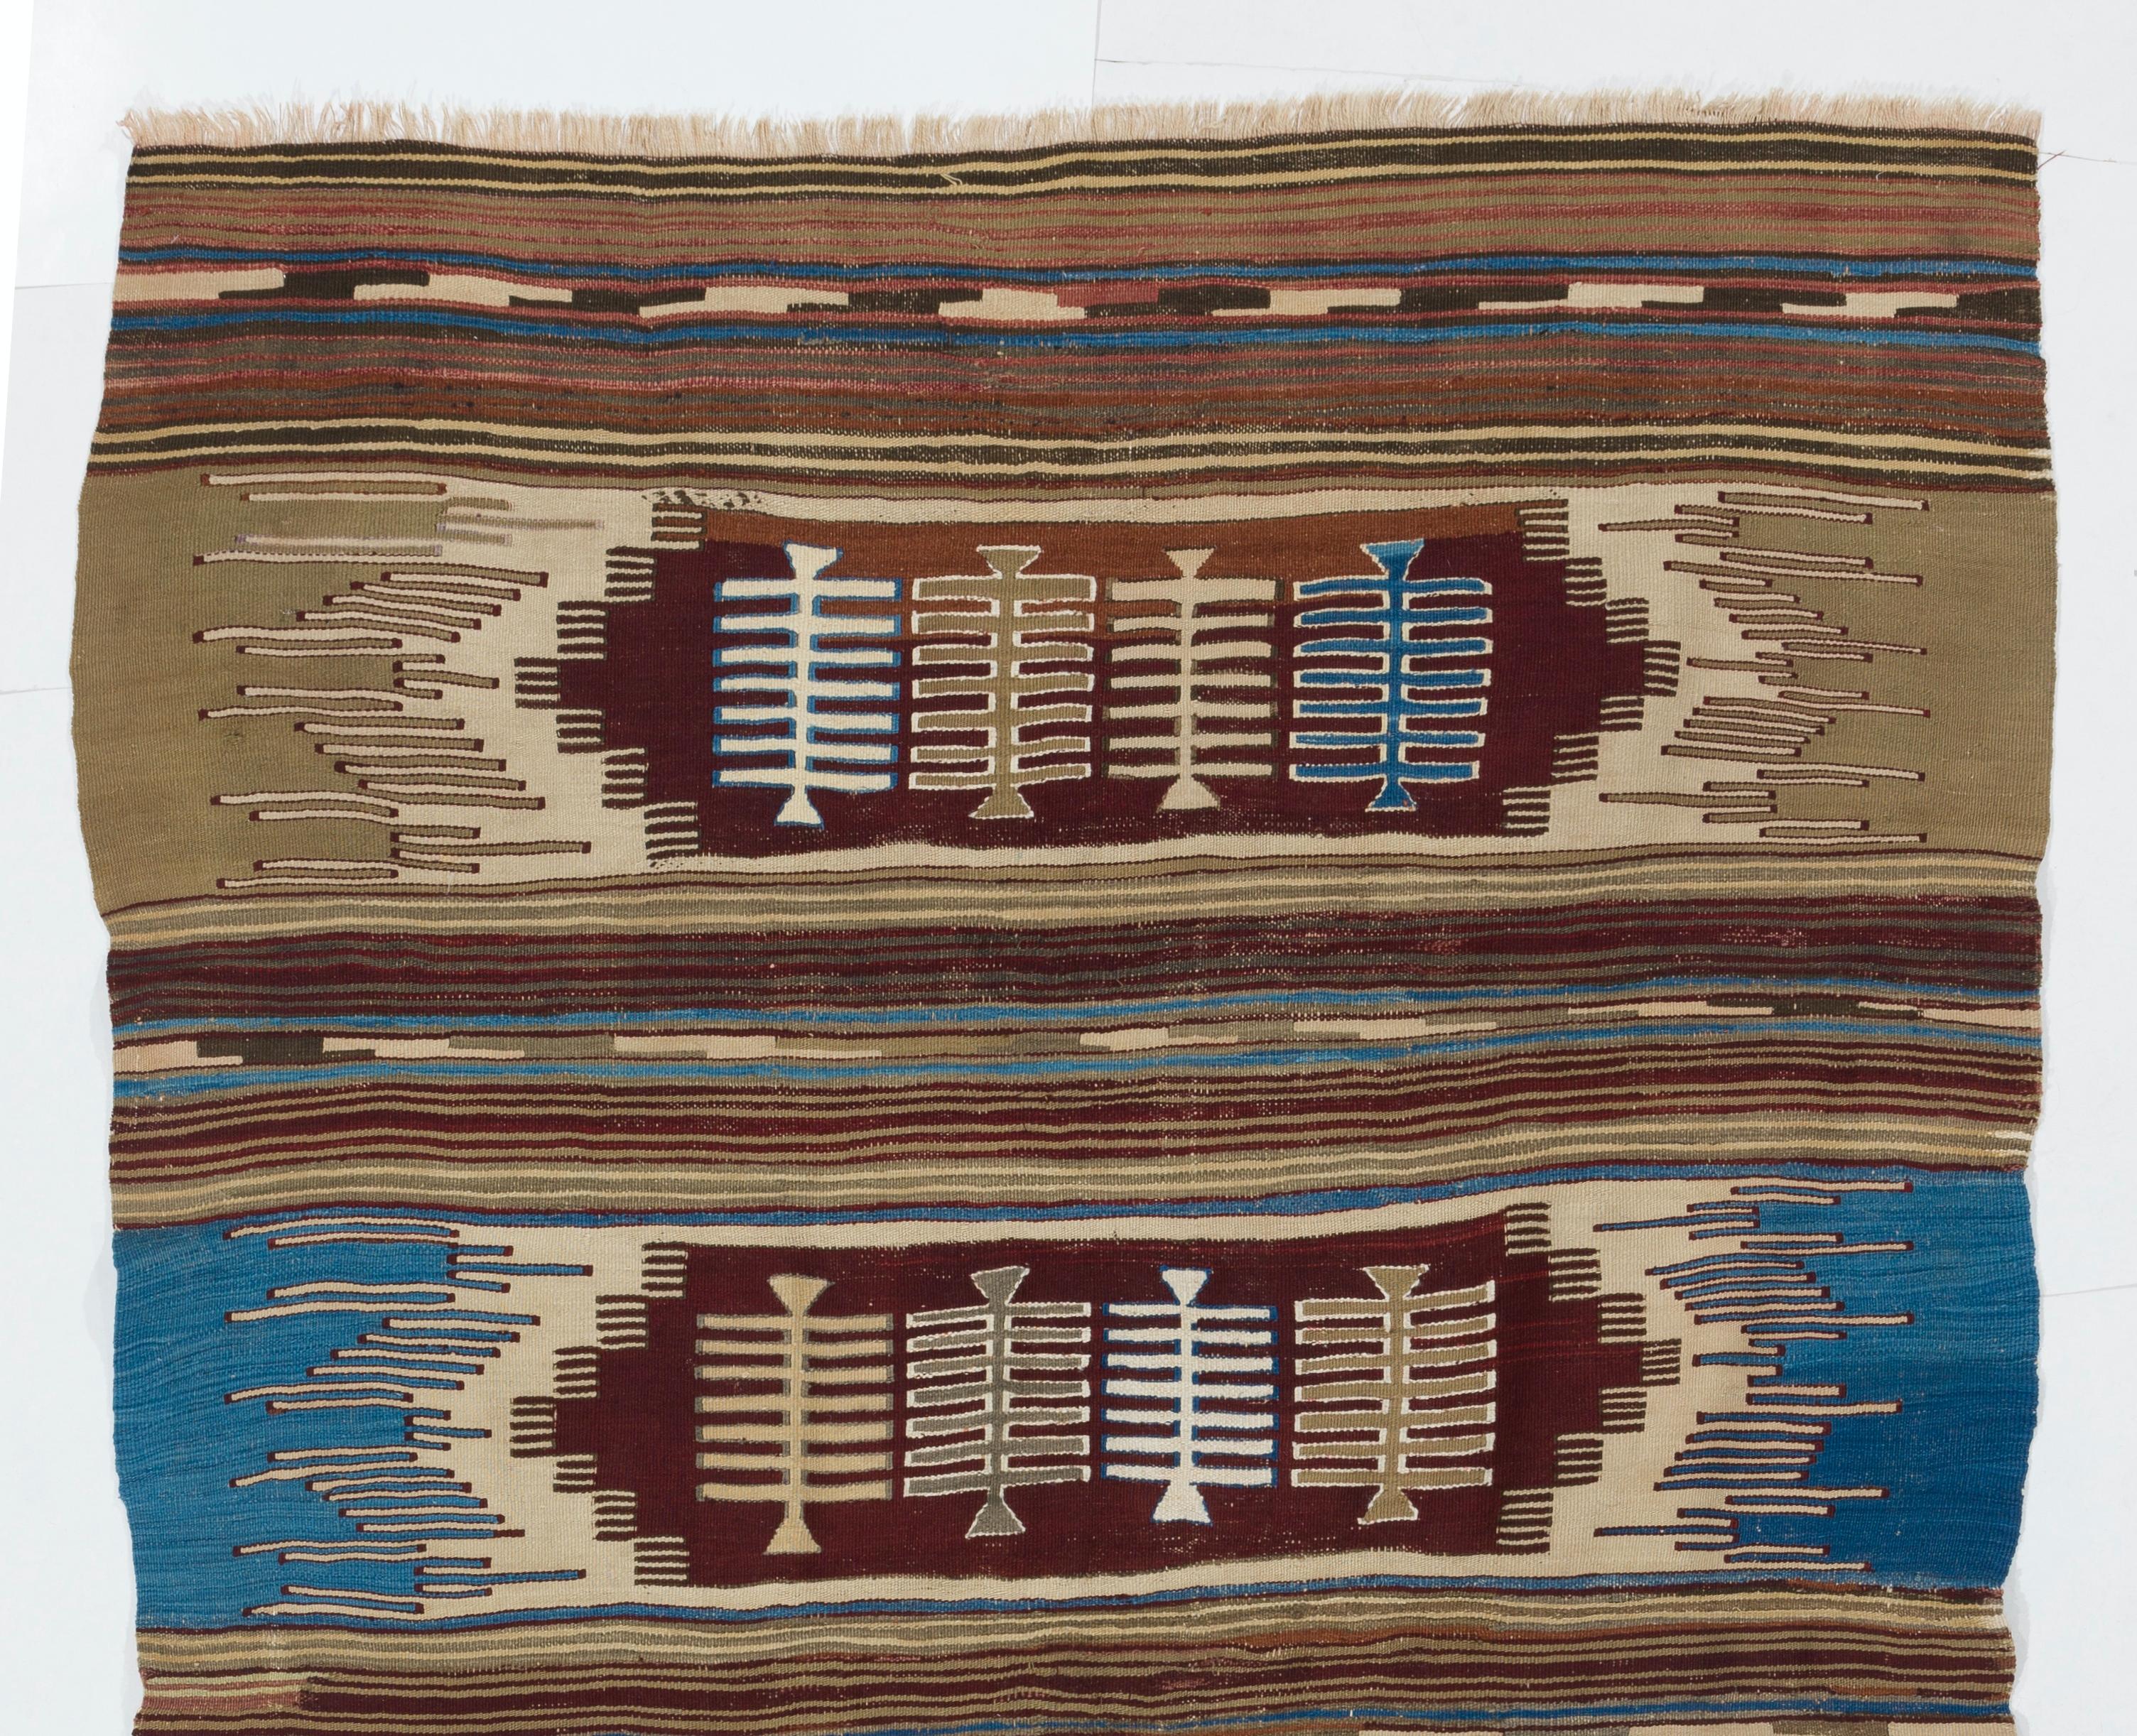 A vintage hand-woven kilim rug from Turkey, made of organic wool, featuring four comb motifs inside four elongated latch hook medallions in four rows across the width of the field in a color palette of burgundy, blue, sand beige, ivory and taupe.